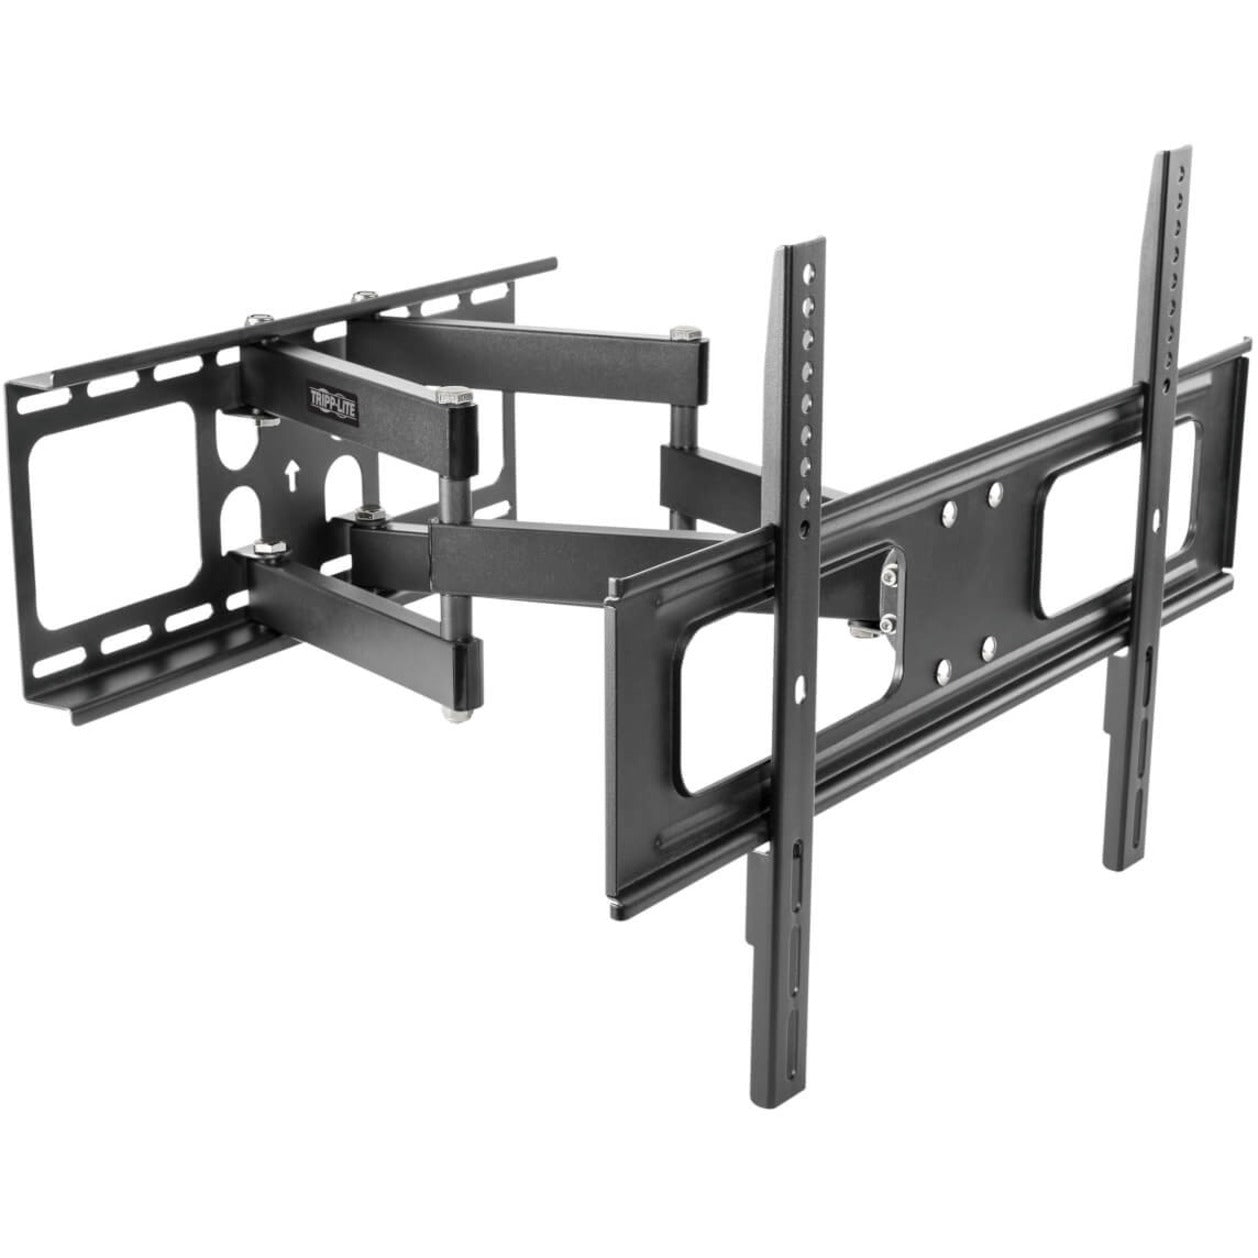 Tripp Lite TV Wall Mount Outdoor Swivel Tilt with Fully Articulating Arm for 37-80in Flat Screen Displays Main image